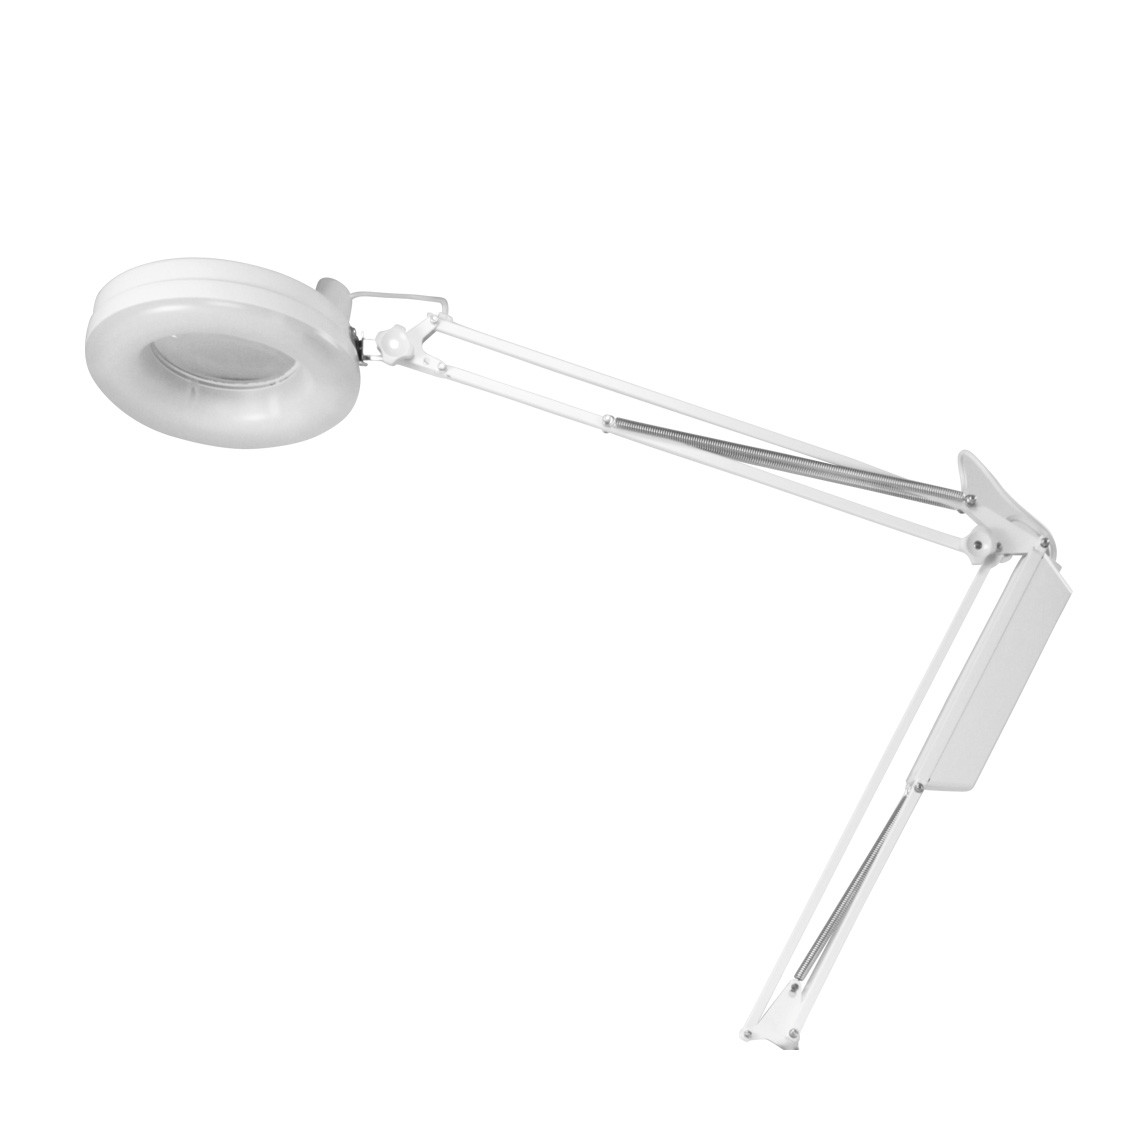 Lampes loupe Afma néon 5 dioptries